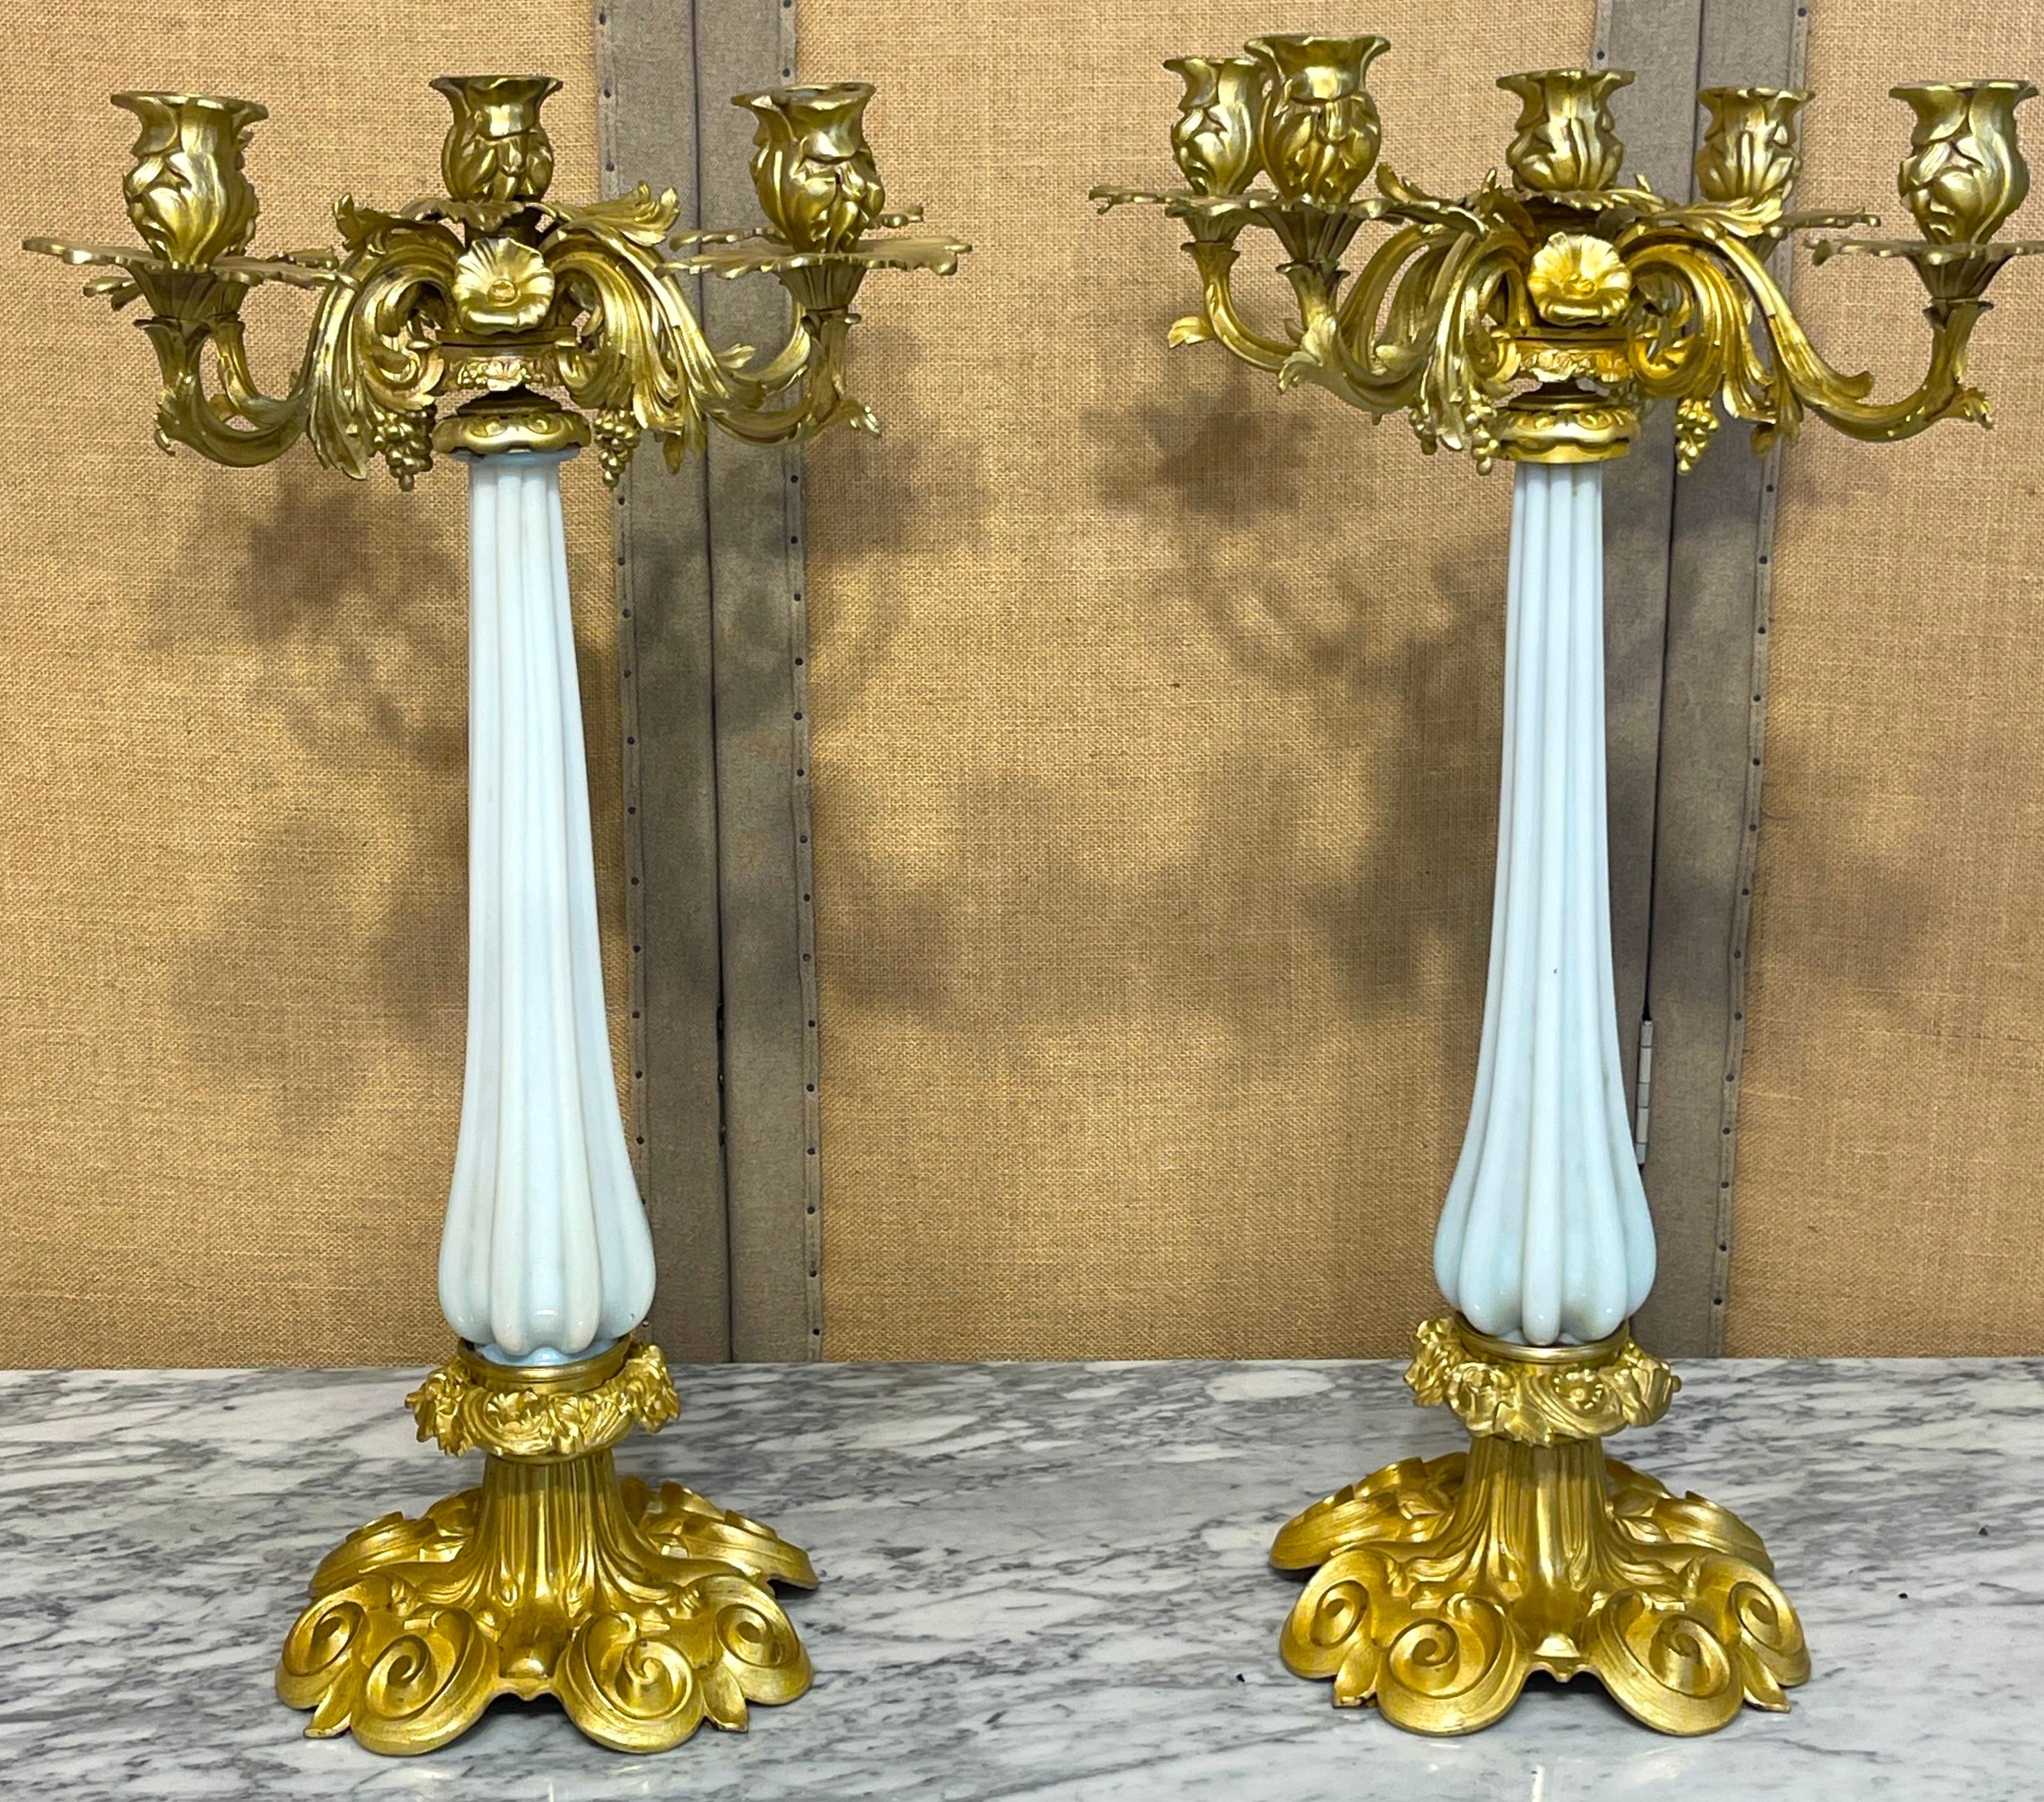 High Victorian Pair of 19th Century French Ormolu & Opaline Palais Royal Candelabra For Sale